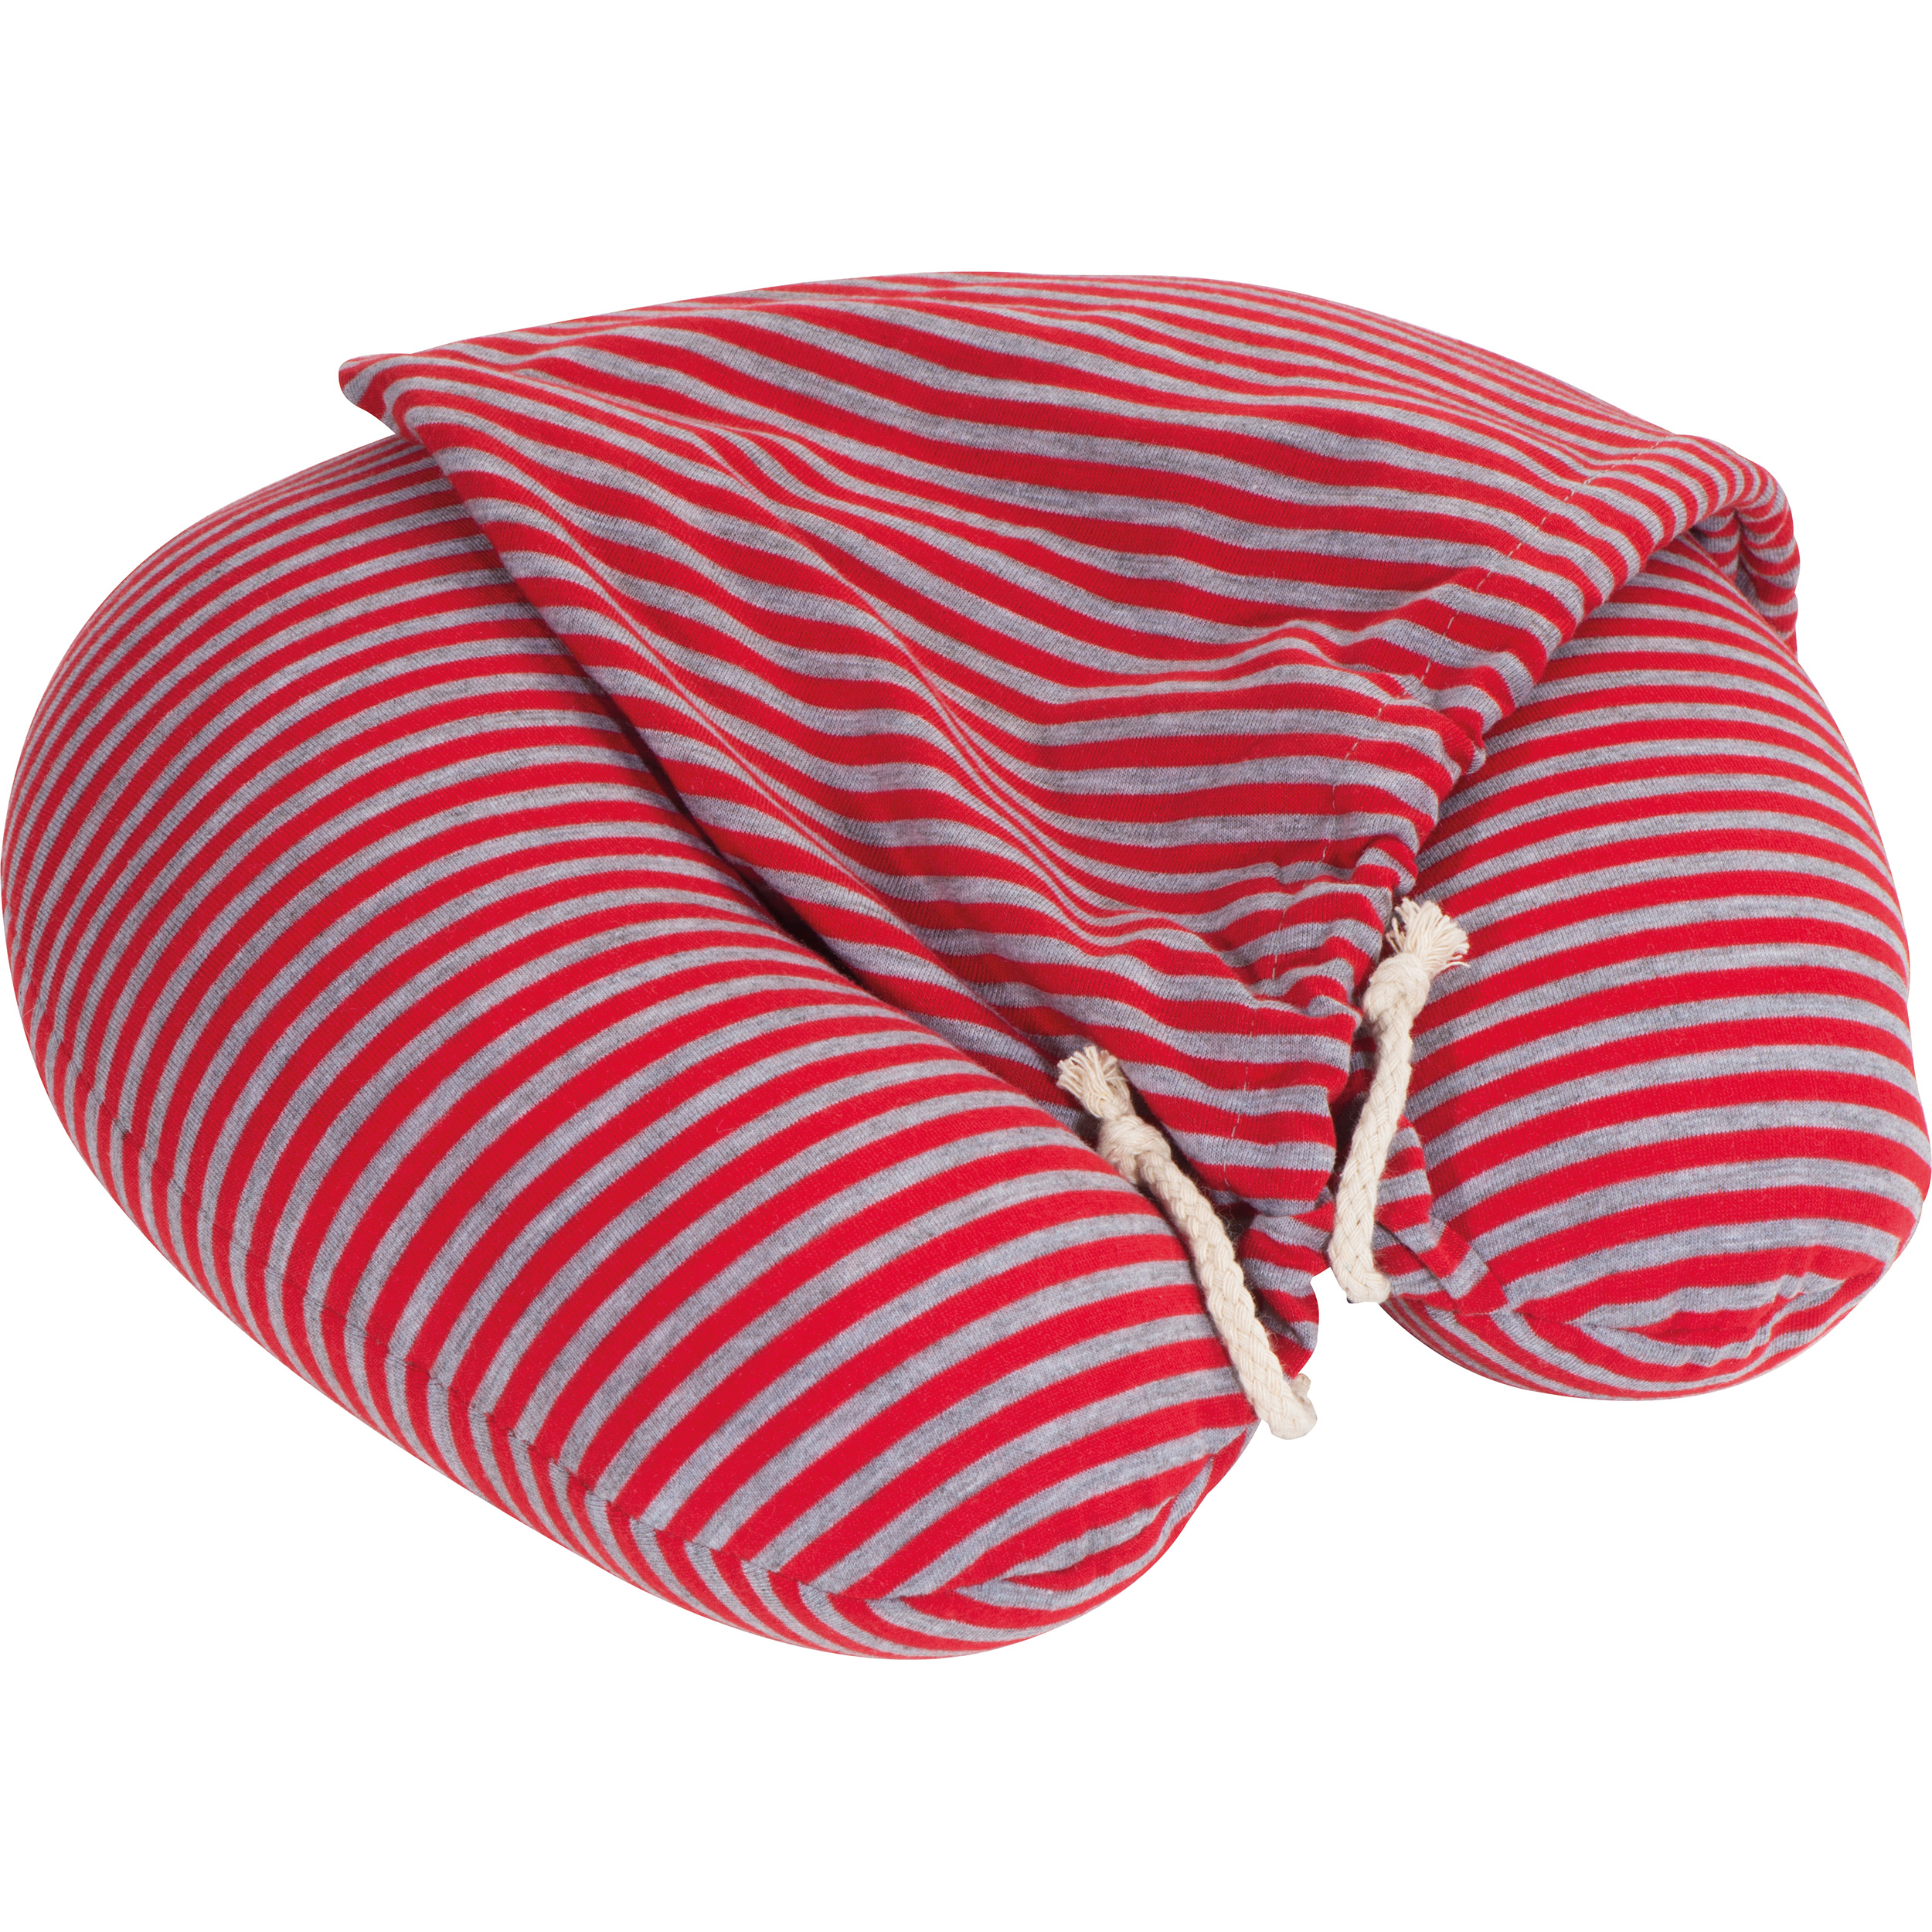 Striped Neck pillow with hood